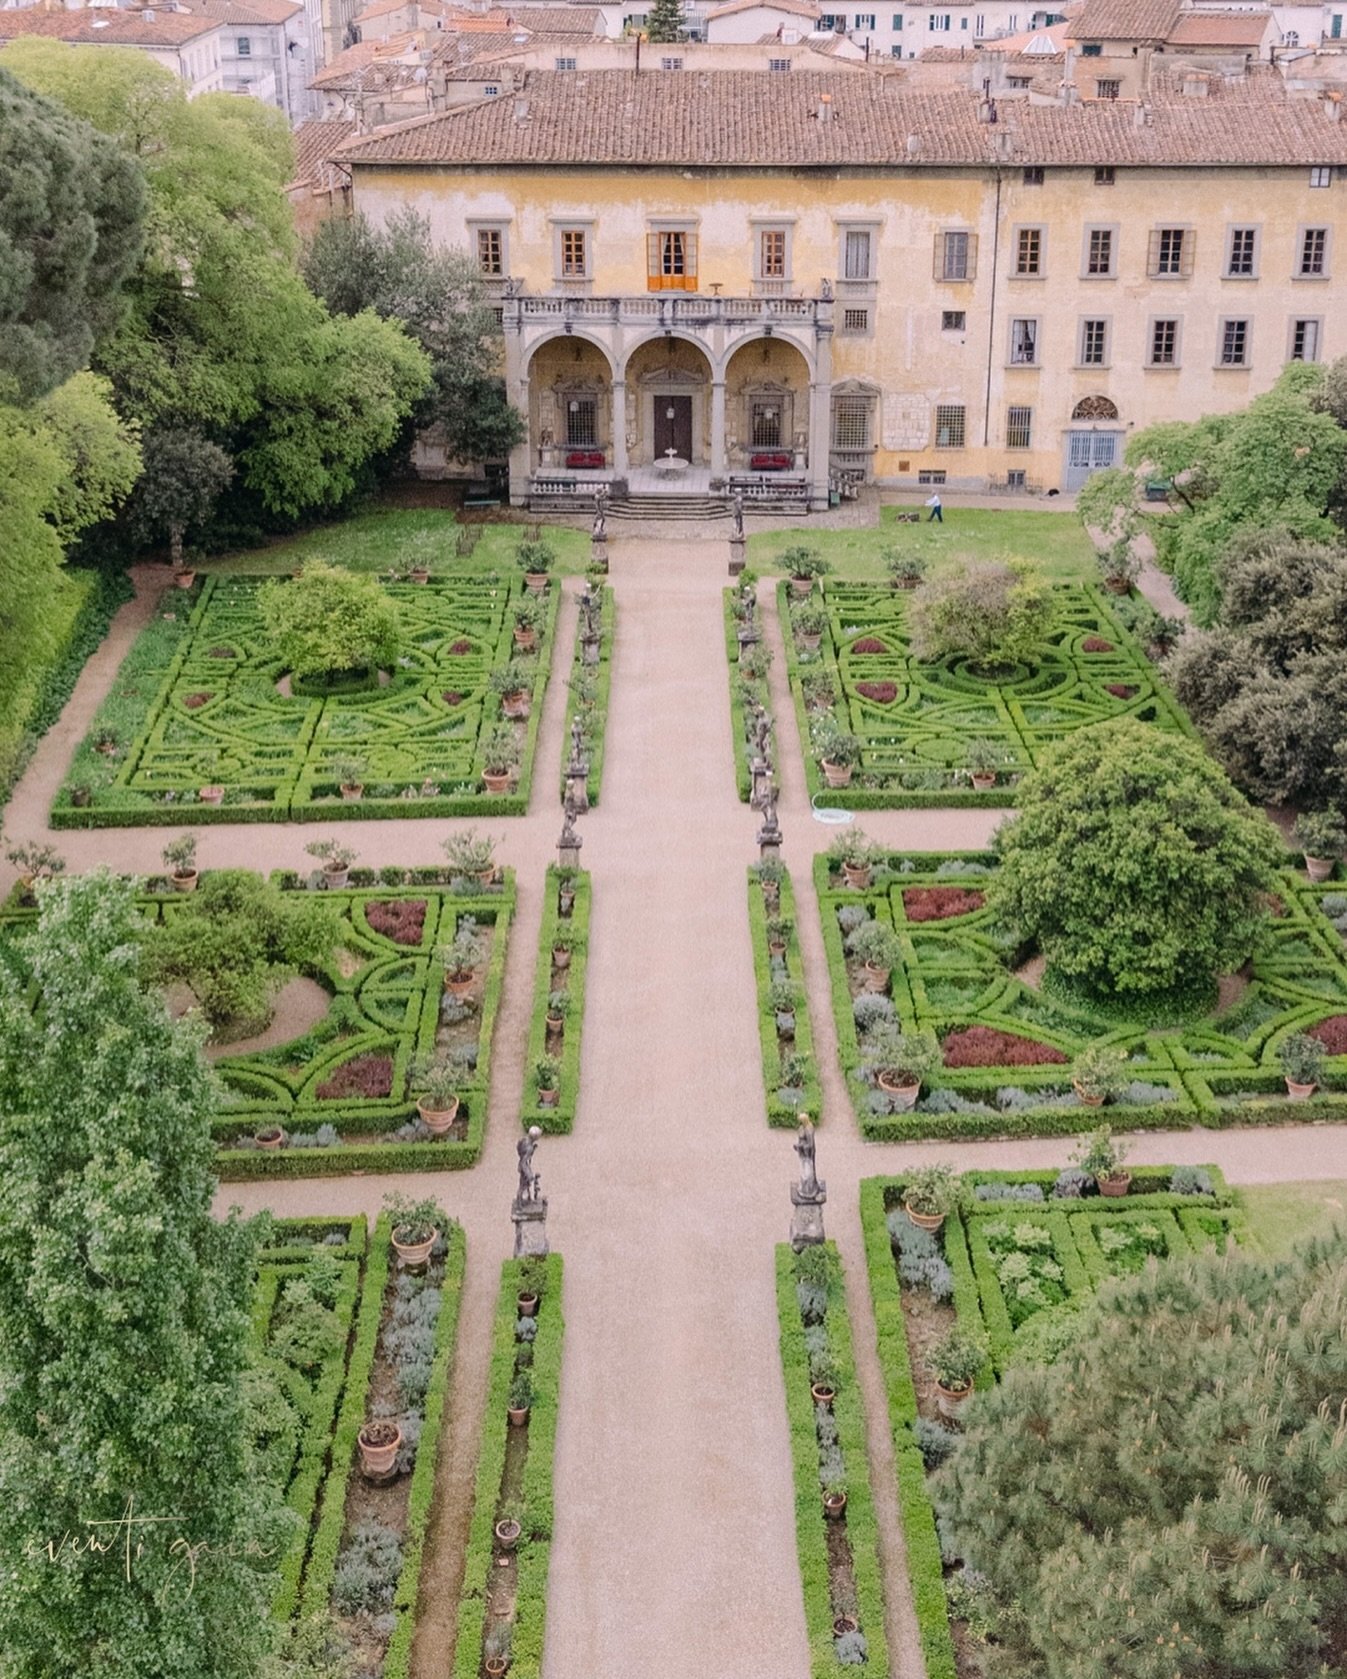 Step into our Italian gardens and immerse yourself in a living masterpiece of beauty.

#eventigaia #destinationwedding #intimatewedding #weddingplanner #weddinginflorence #weddingplanner #bespokewedding #exclusivewedding #weddinginspiration #destinat